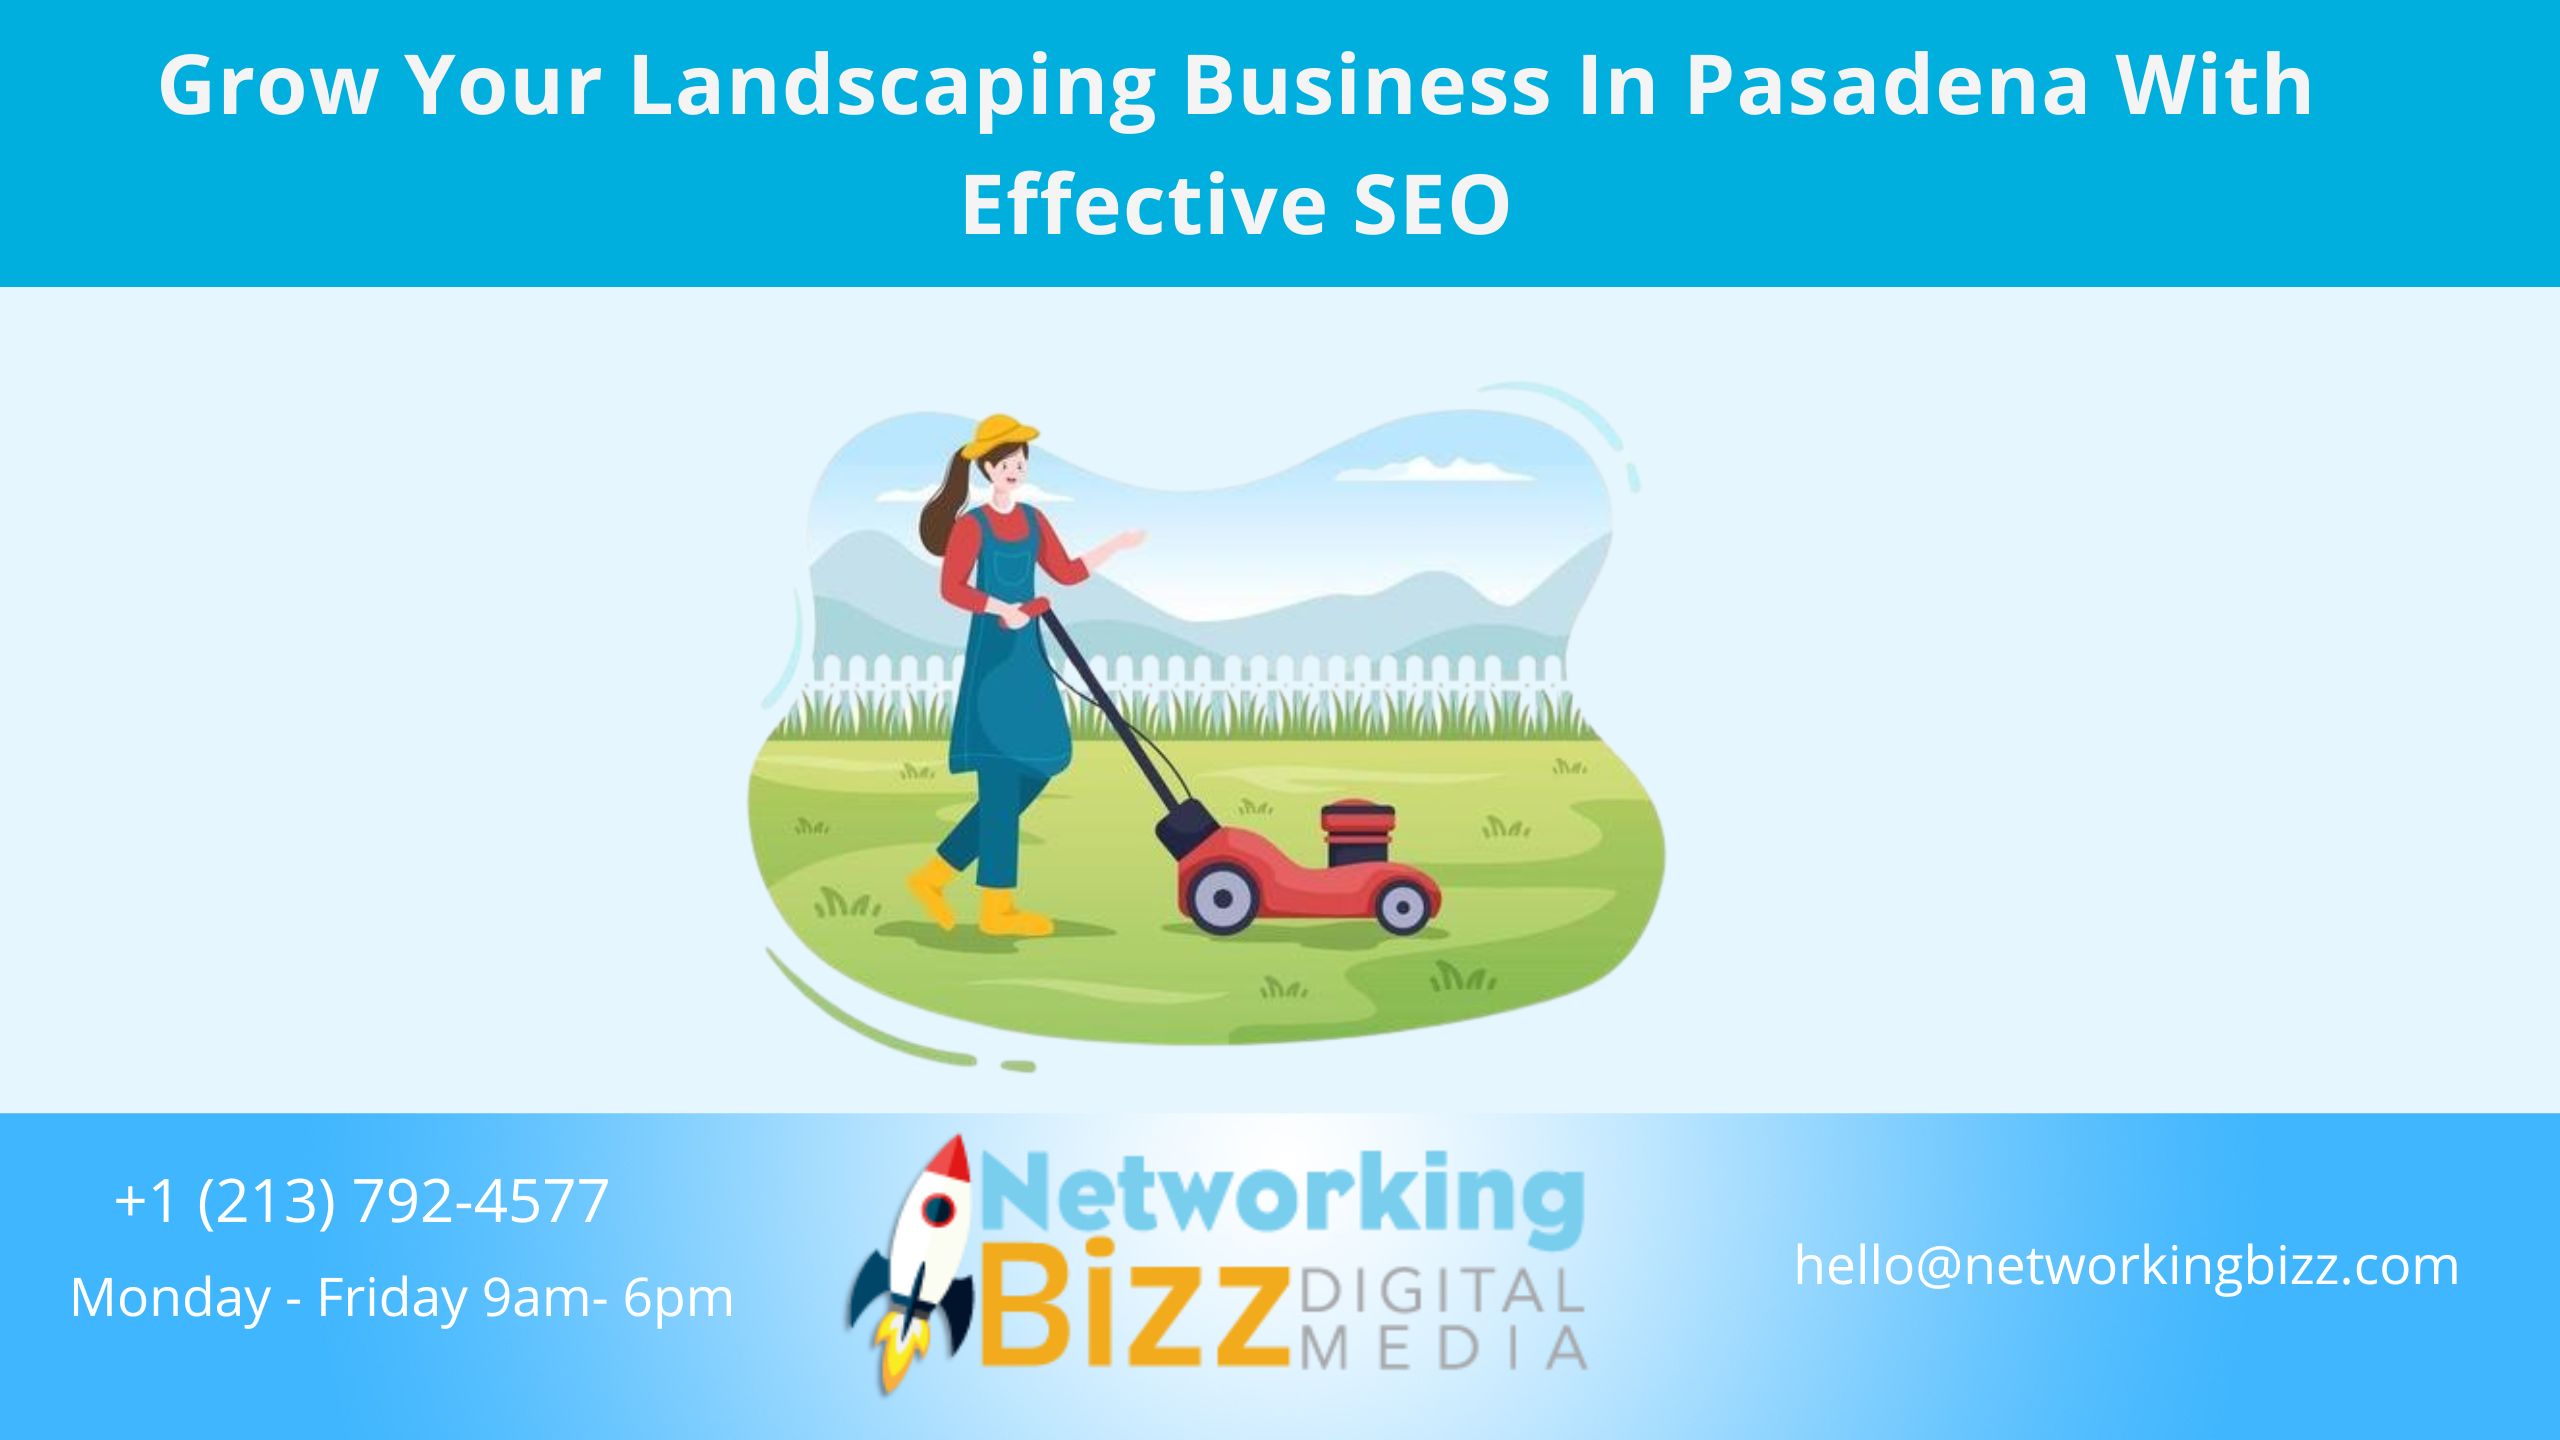 Grow Your Landscaping Business In Pasadena With Effective SEO